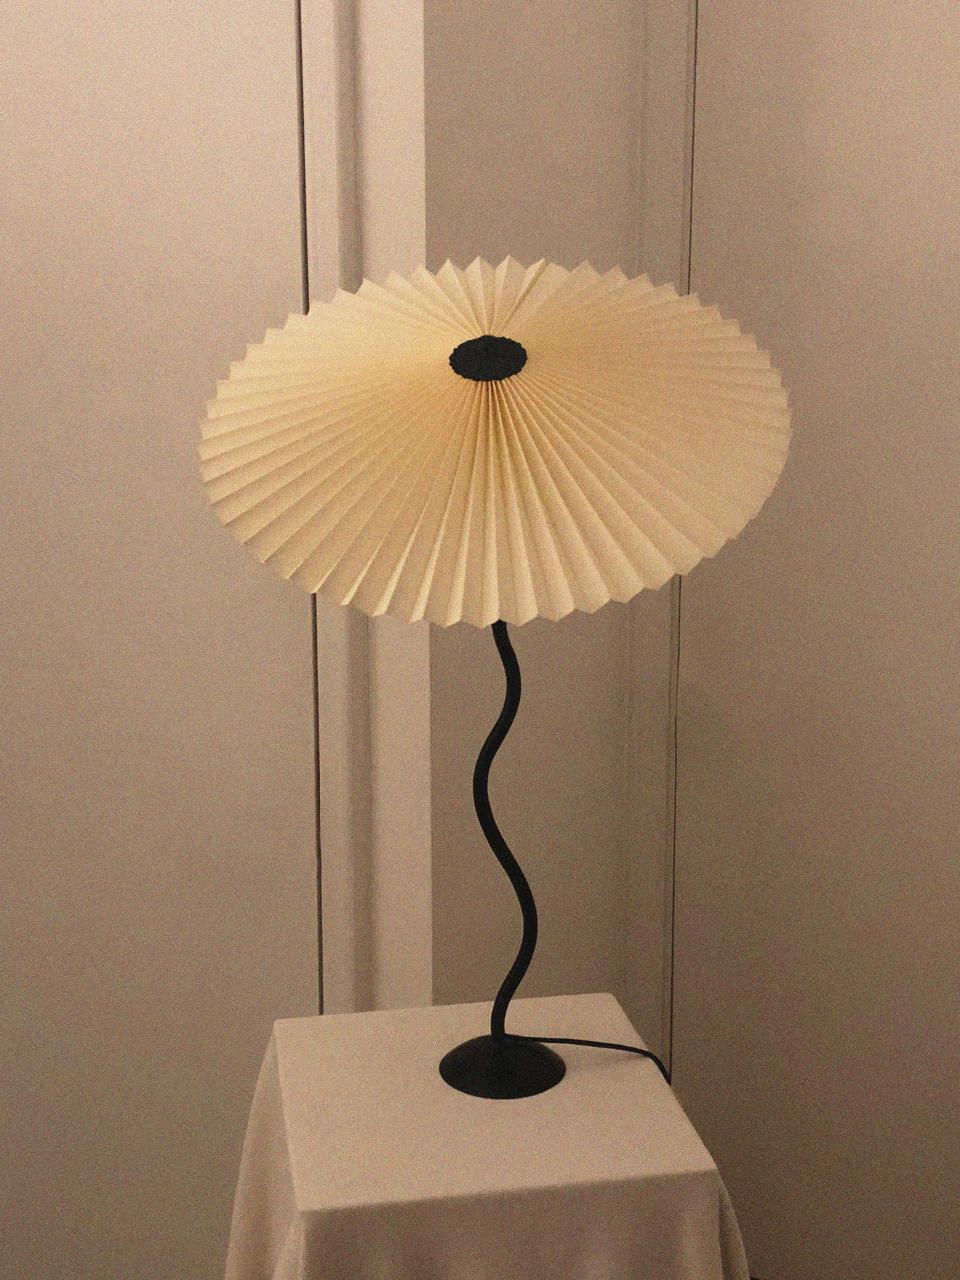 22-year-old Sicilian artist Oscar Piccolo is the mastermind behind these Instagram-beloved pleated lamps.